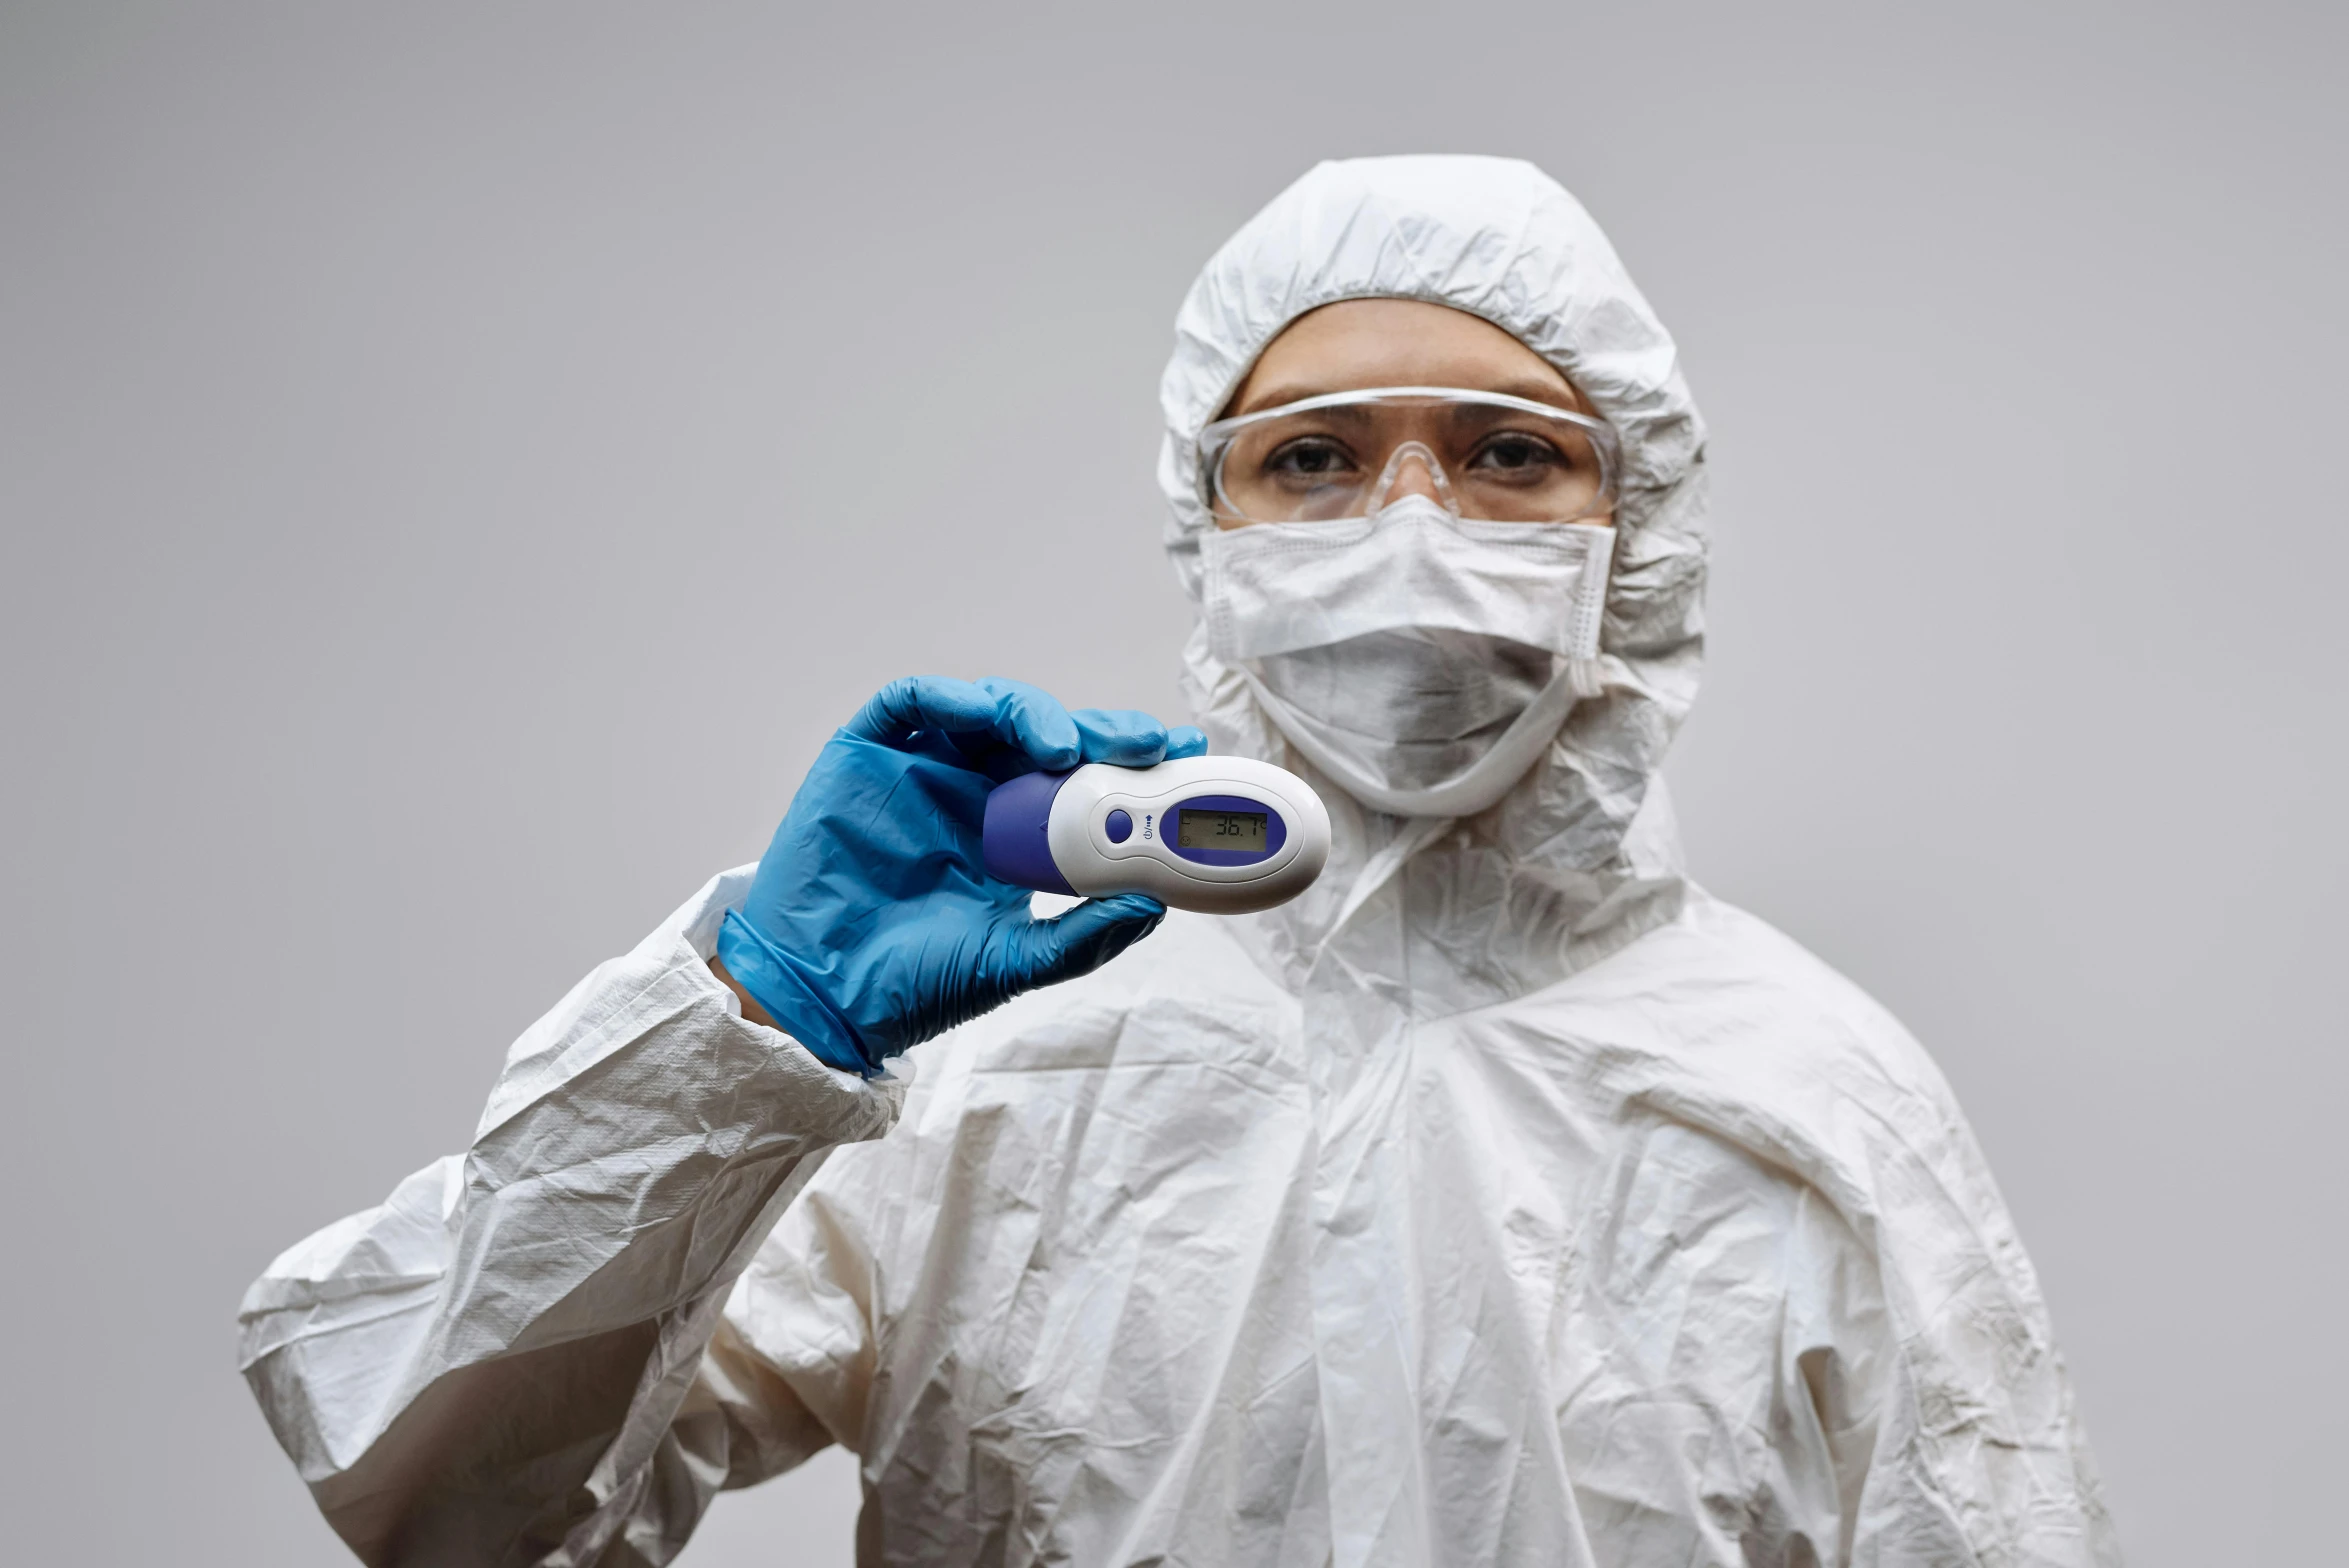 a man in a protective suit brushing his teeth, a portrait, by Adam Marczyński, shutterstock, holding controller, avatar image, medical equipment, cold temperature